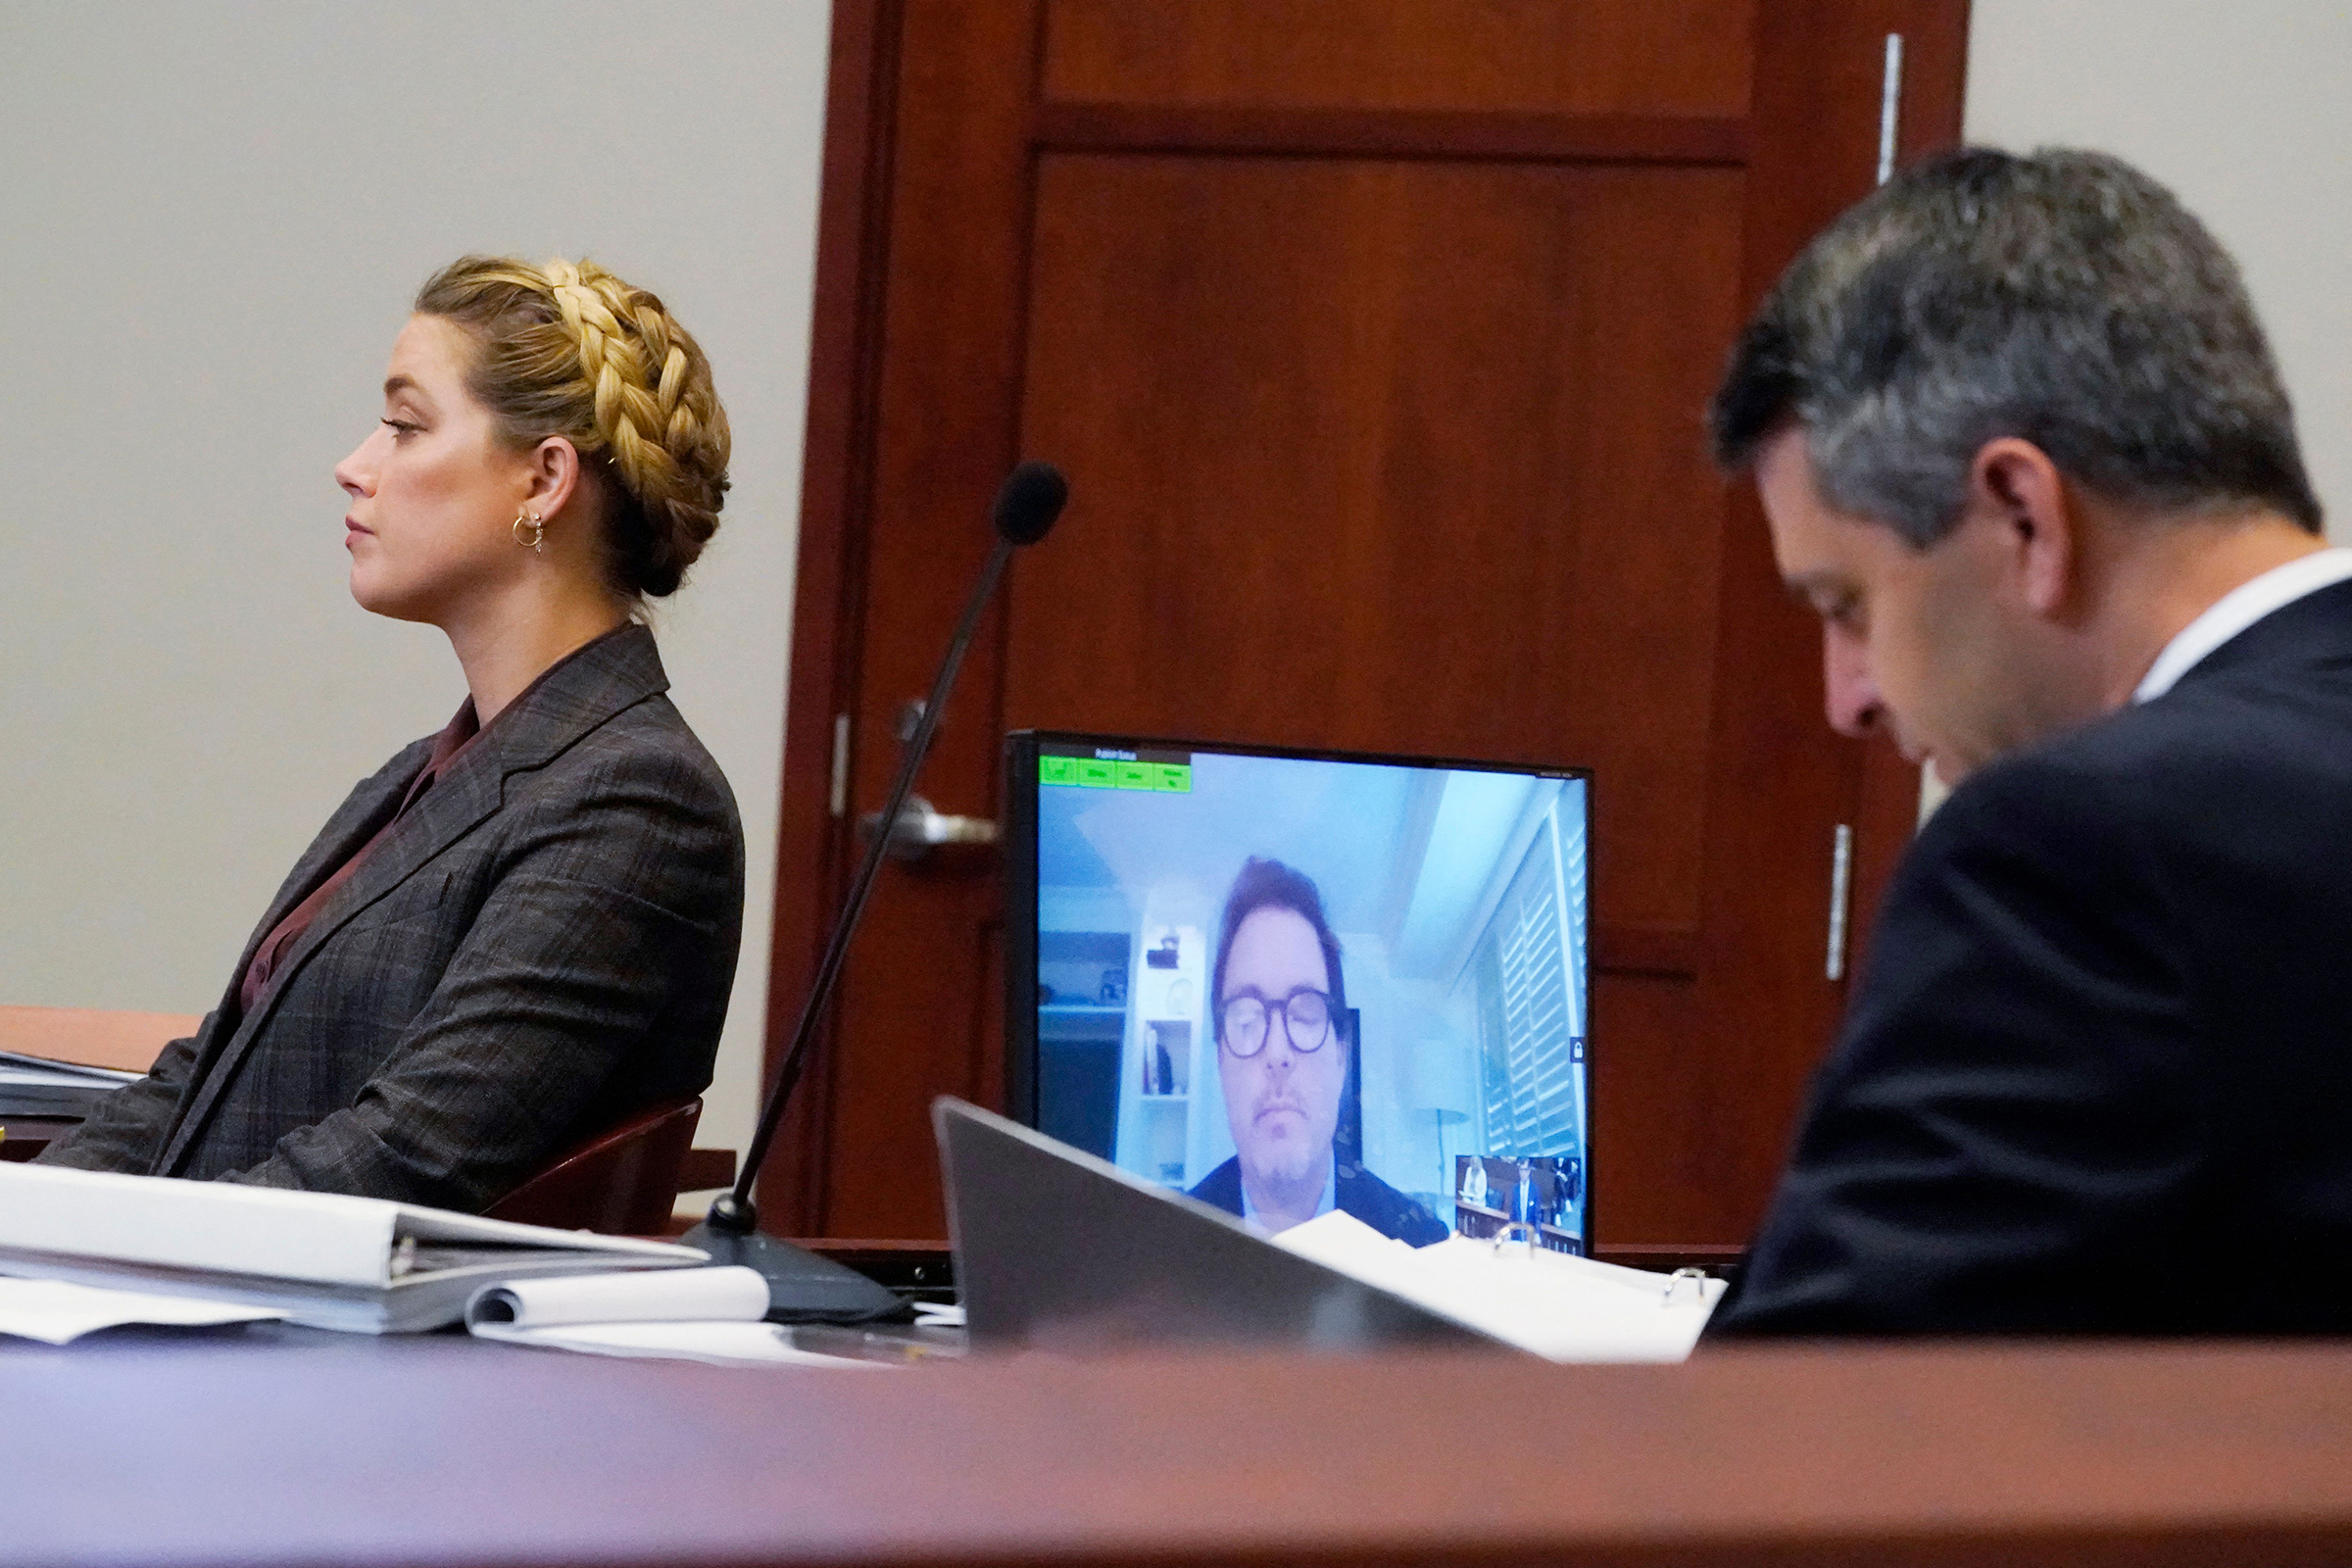 Actress Amber Heard, left, and her attorney, Ben Rottenborn, right, listen as Jack Whigham, center, talent manager for US actor Johnny Depp, is seen on a monitor as he testifies remotely in the courtroom at the Fairfax County Circuit Court in Fairfax, Virginia, on May 2, 2022. (Steve Helber—Pool/AFP/Getty Images)